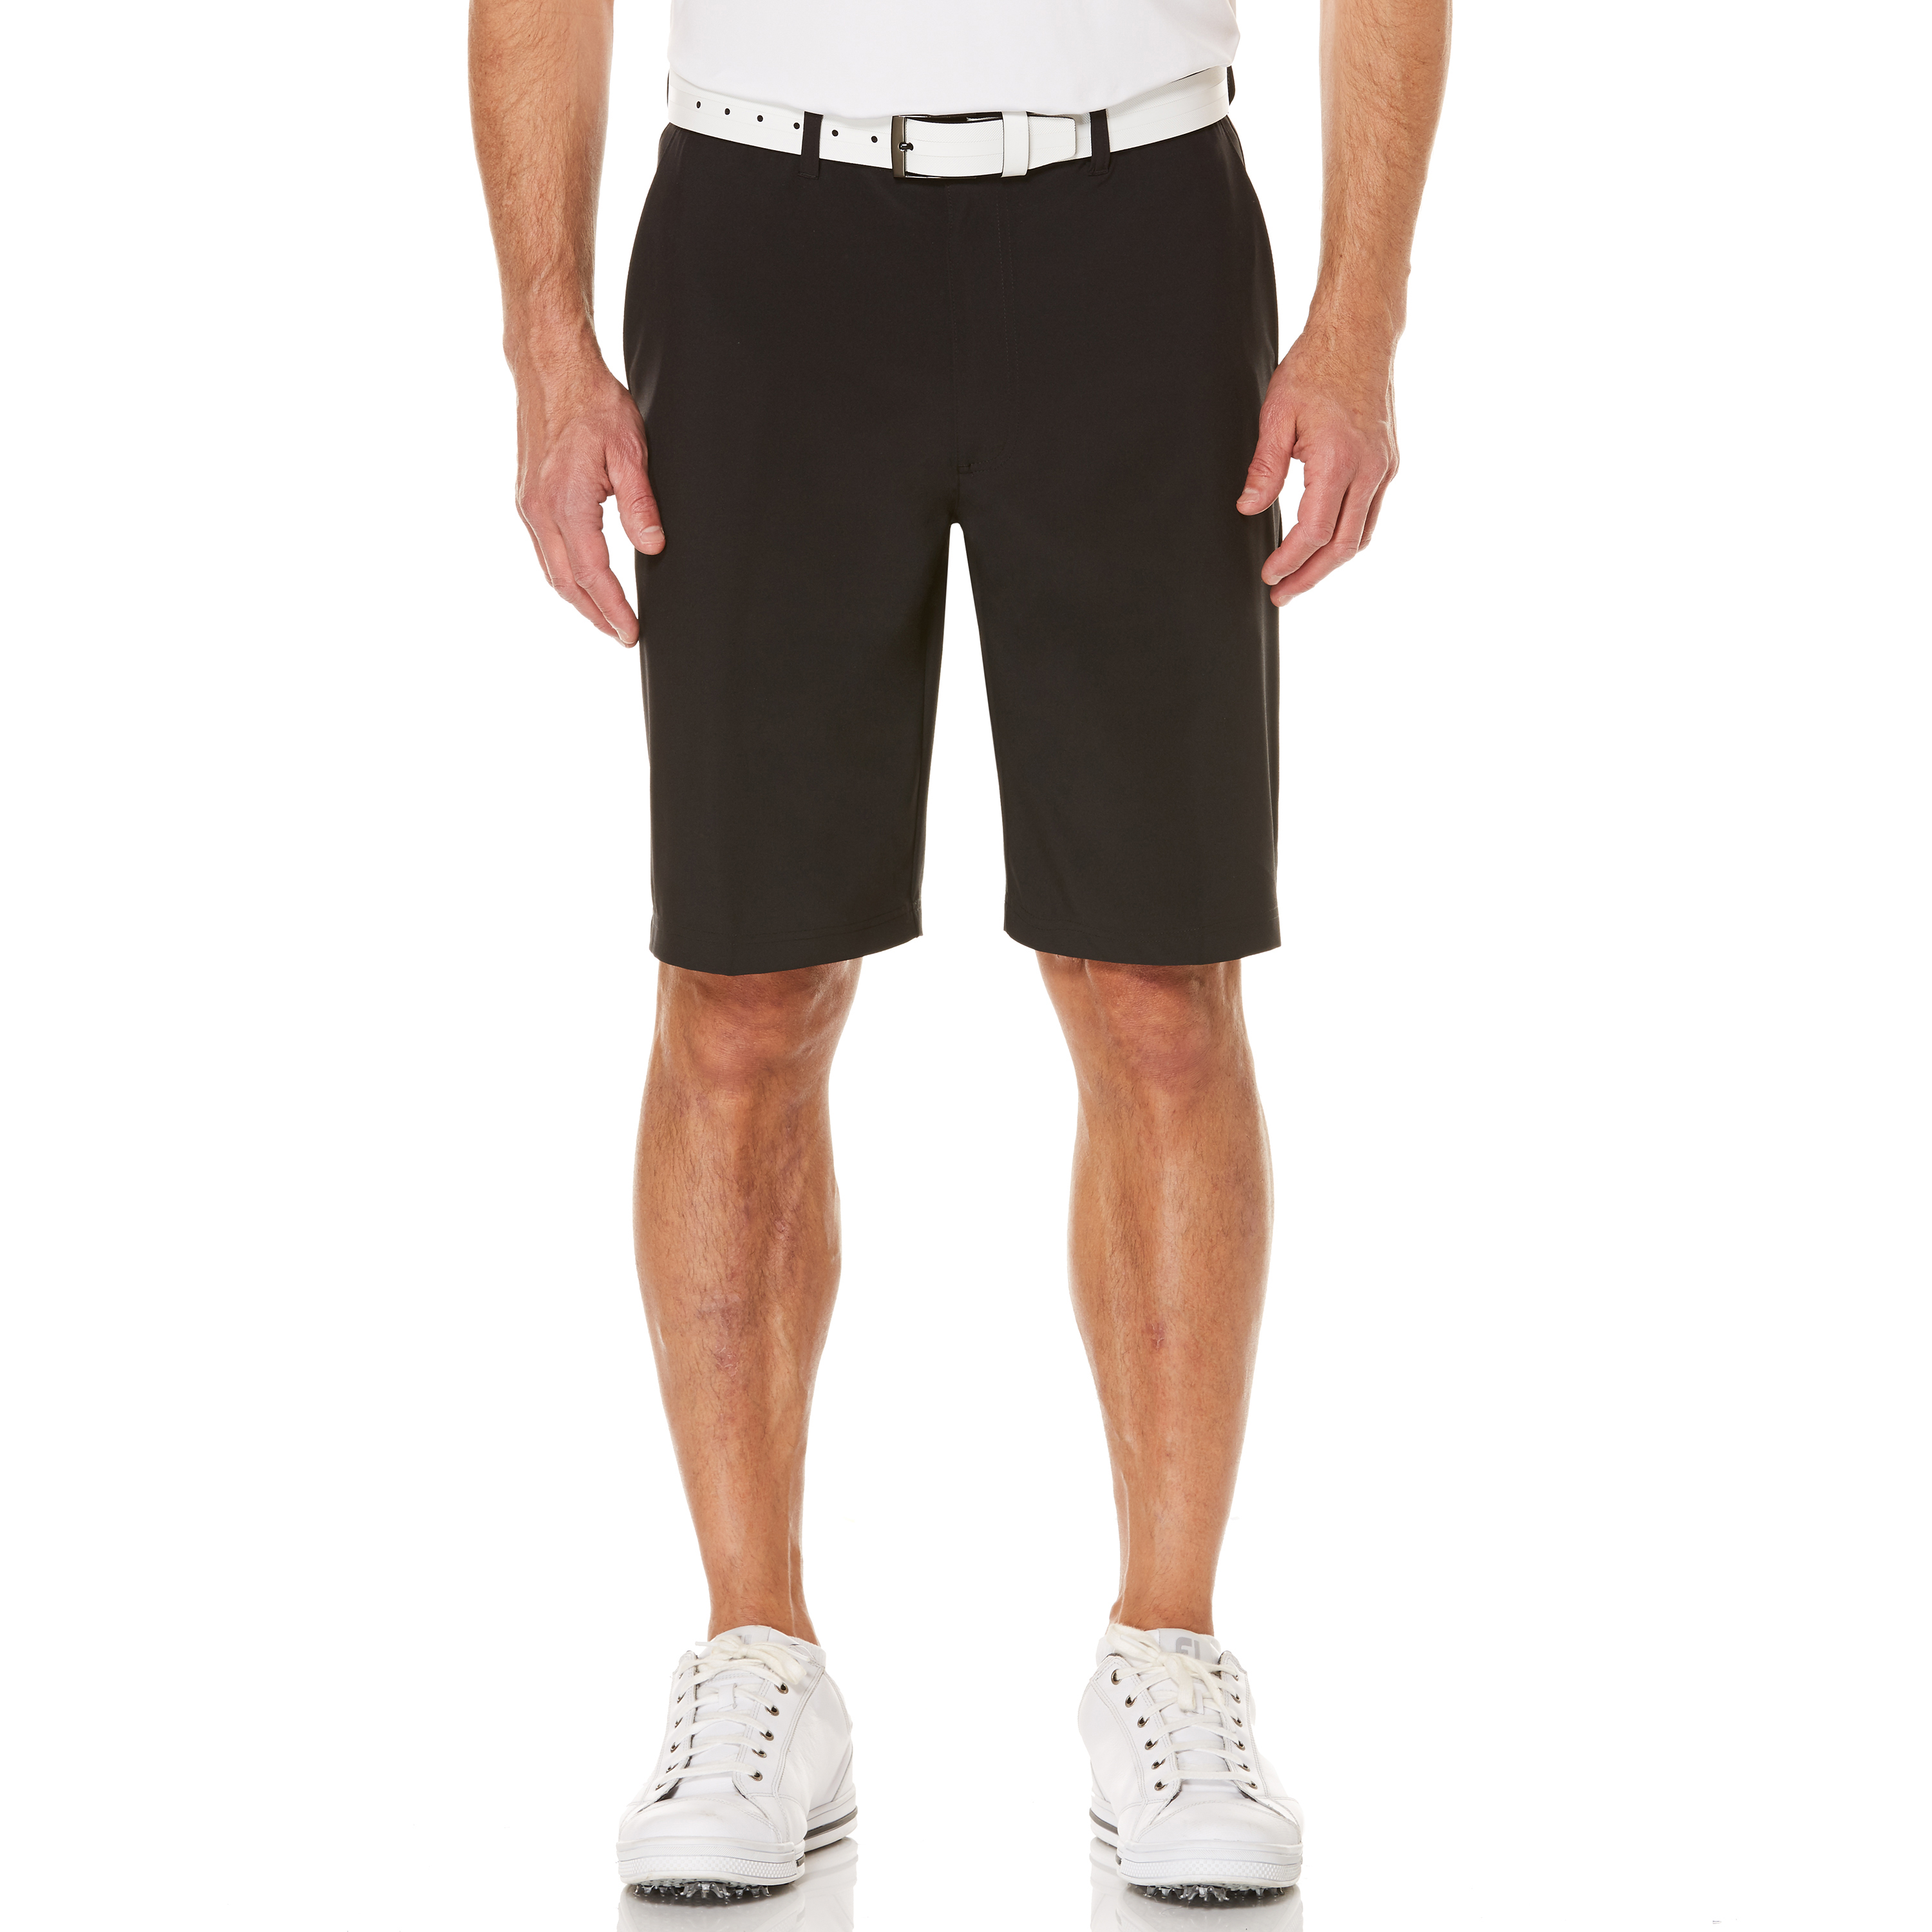 Ben Hogan Performance Men's Flat Front Active Flex Stretch Golf Short, up to 54 inches - image 3 of 3